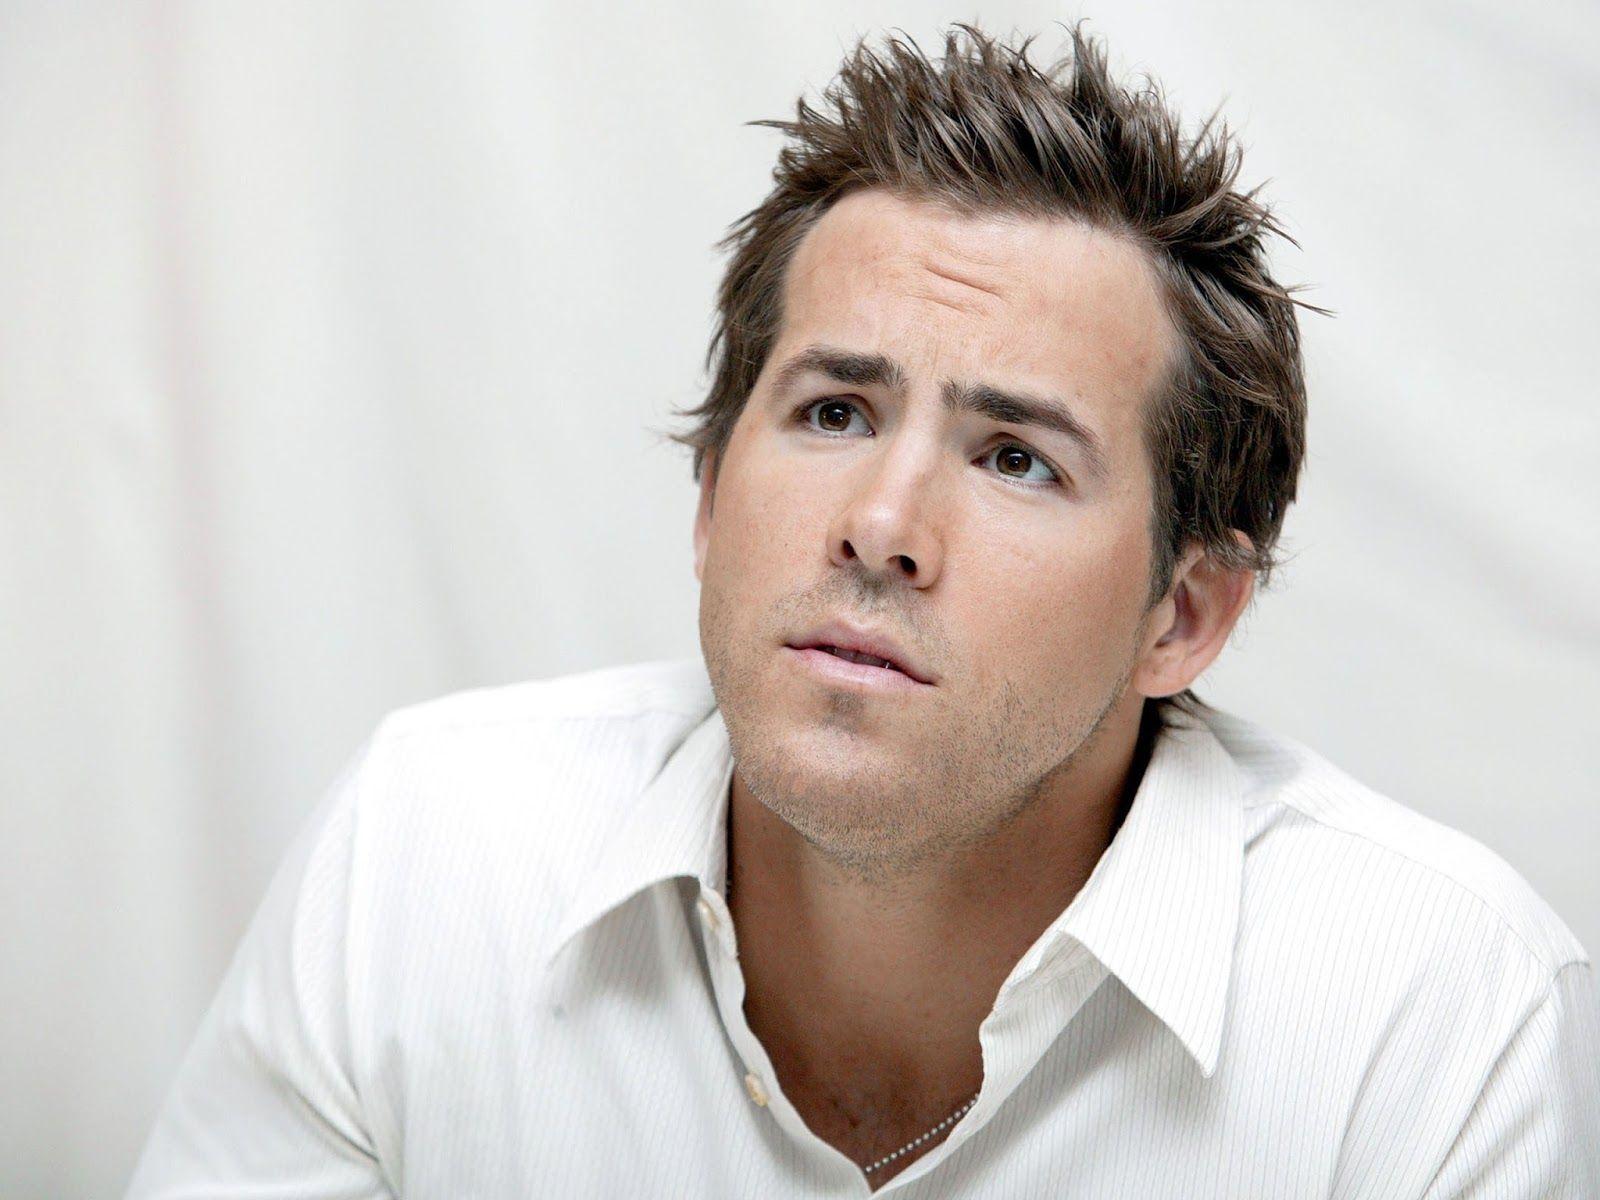 Ryan Reynolds picture and HD wallpaper PICTURE. Free